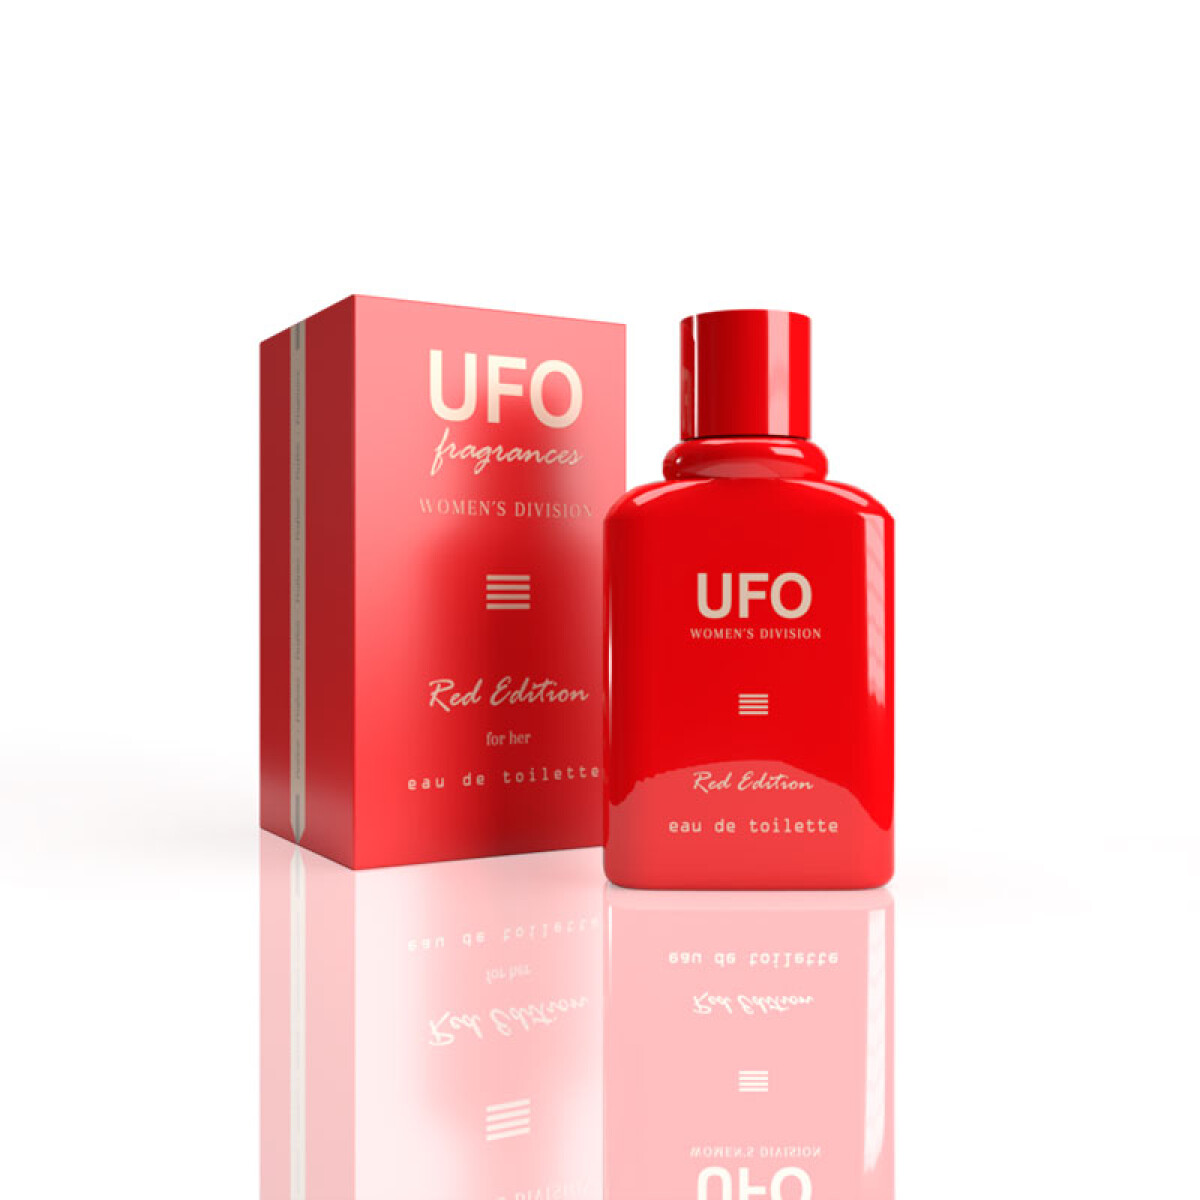 UFO RED EDITION FOR HER 60ML 